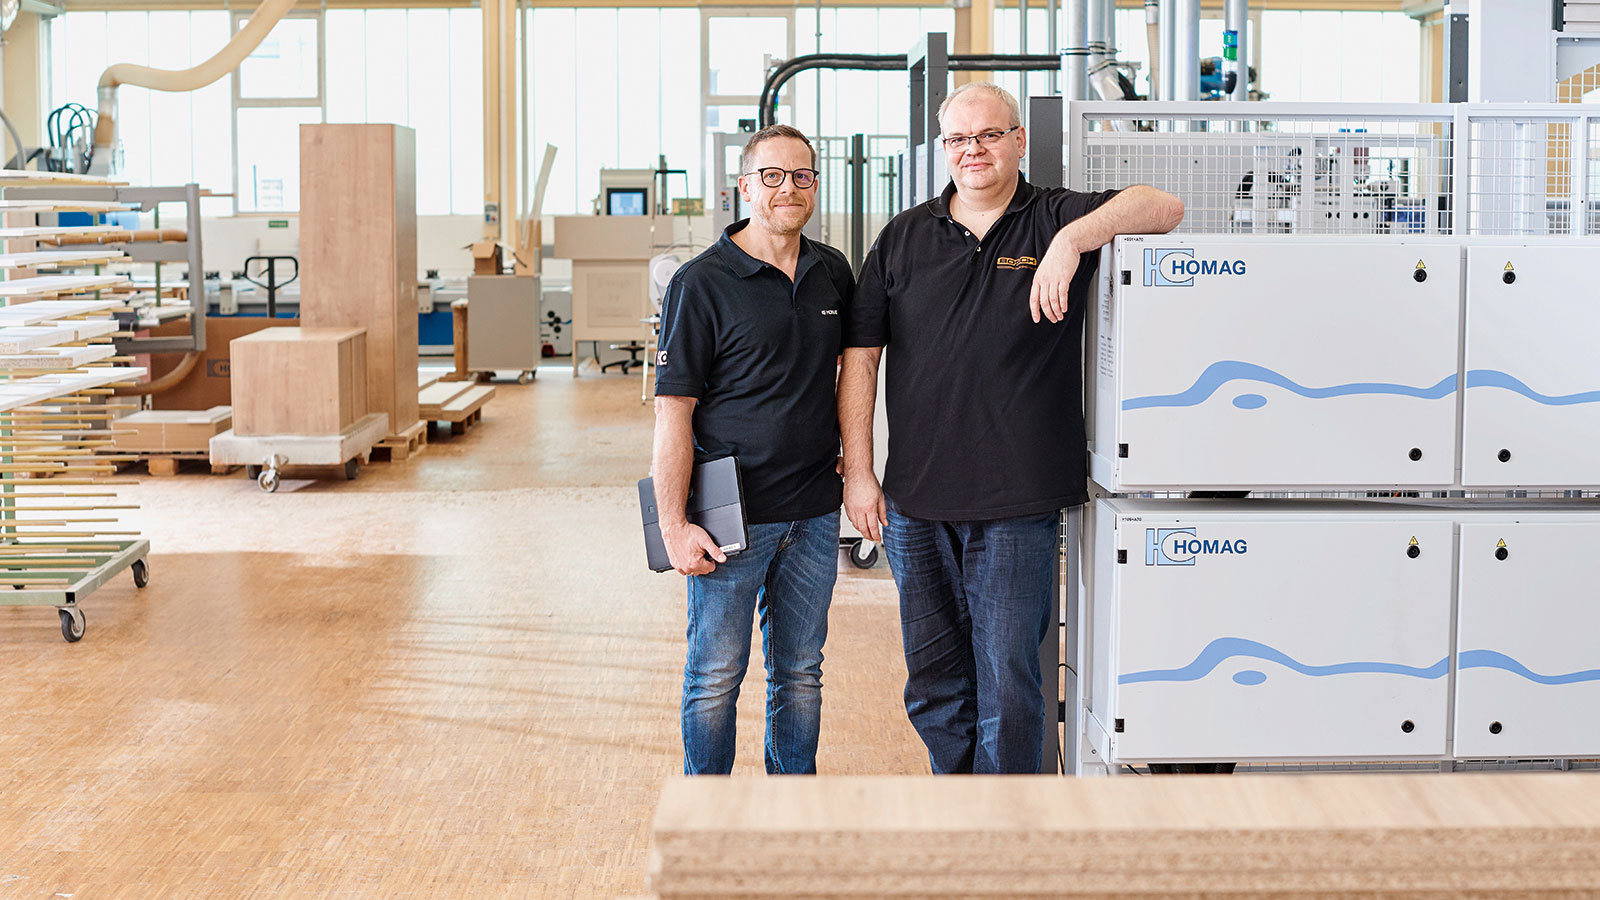 "Bosch and HOMAG; that's family to me" — Norbert Bosch, master joiner and managing director